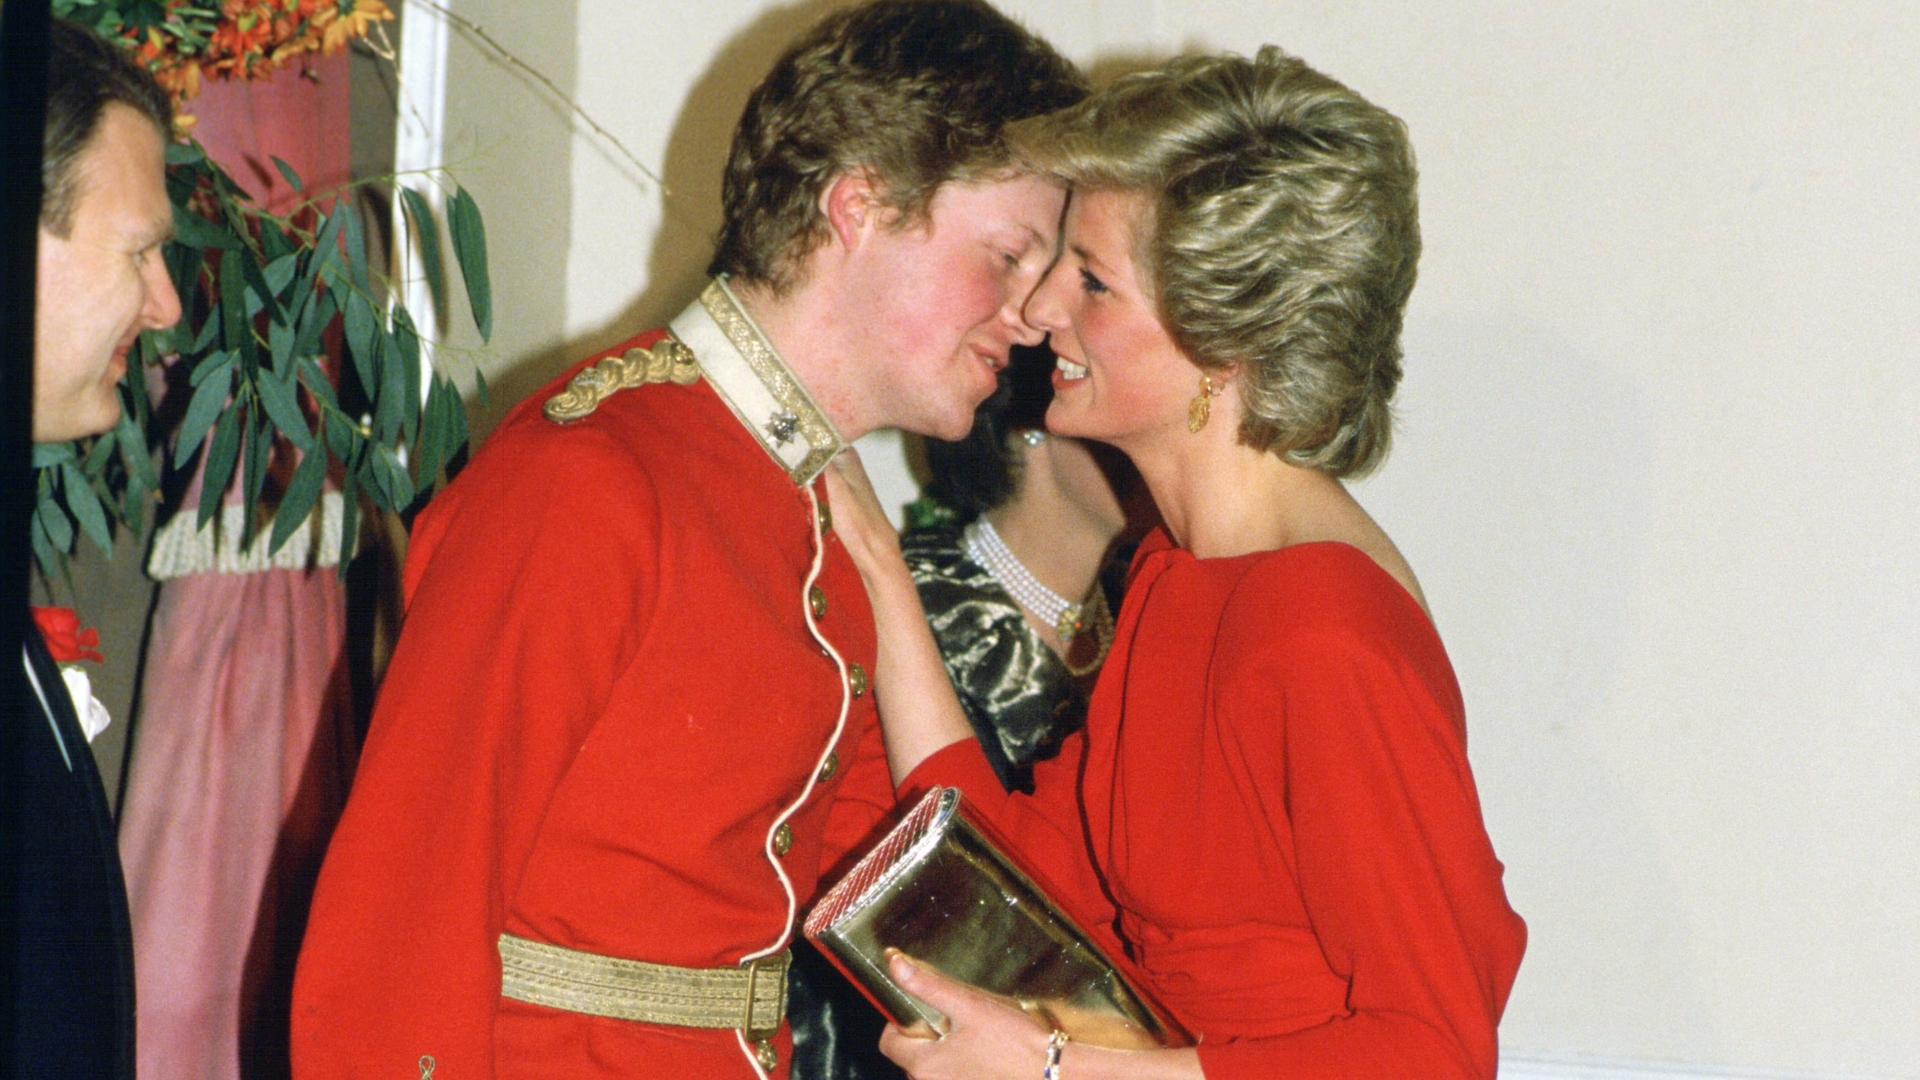 Diana, Princess of Wales kisses her brother, Earl Charles Spencer at the Birthright Ball